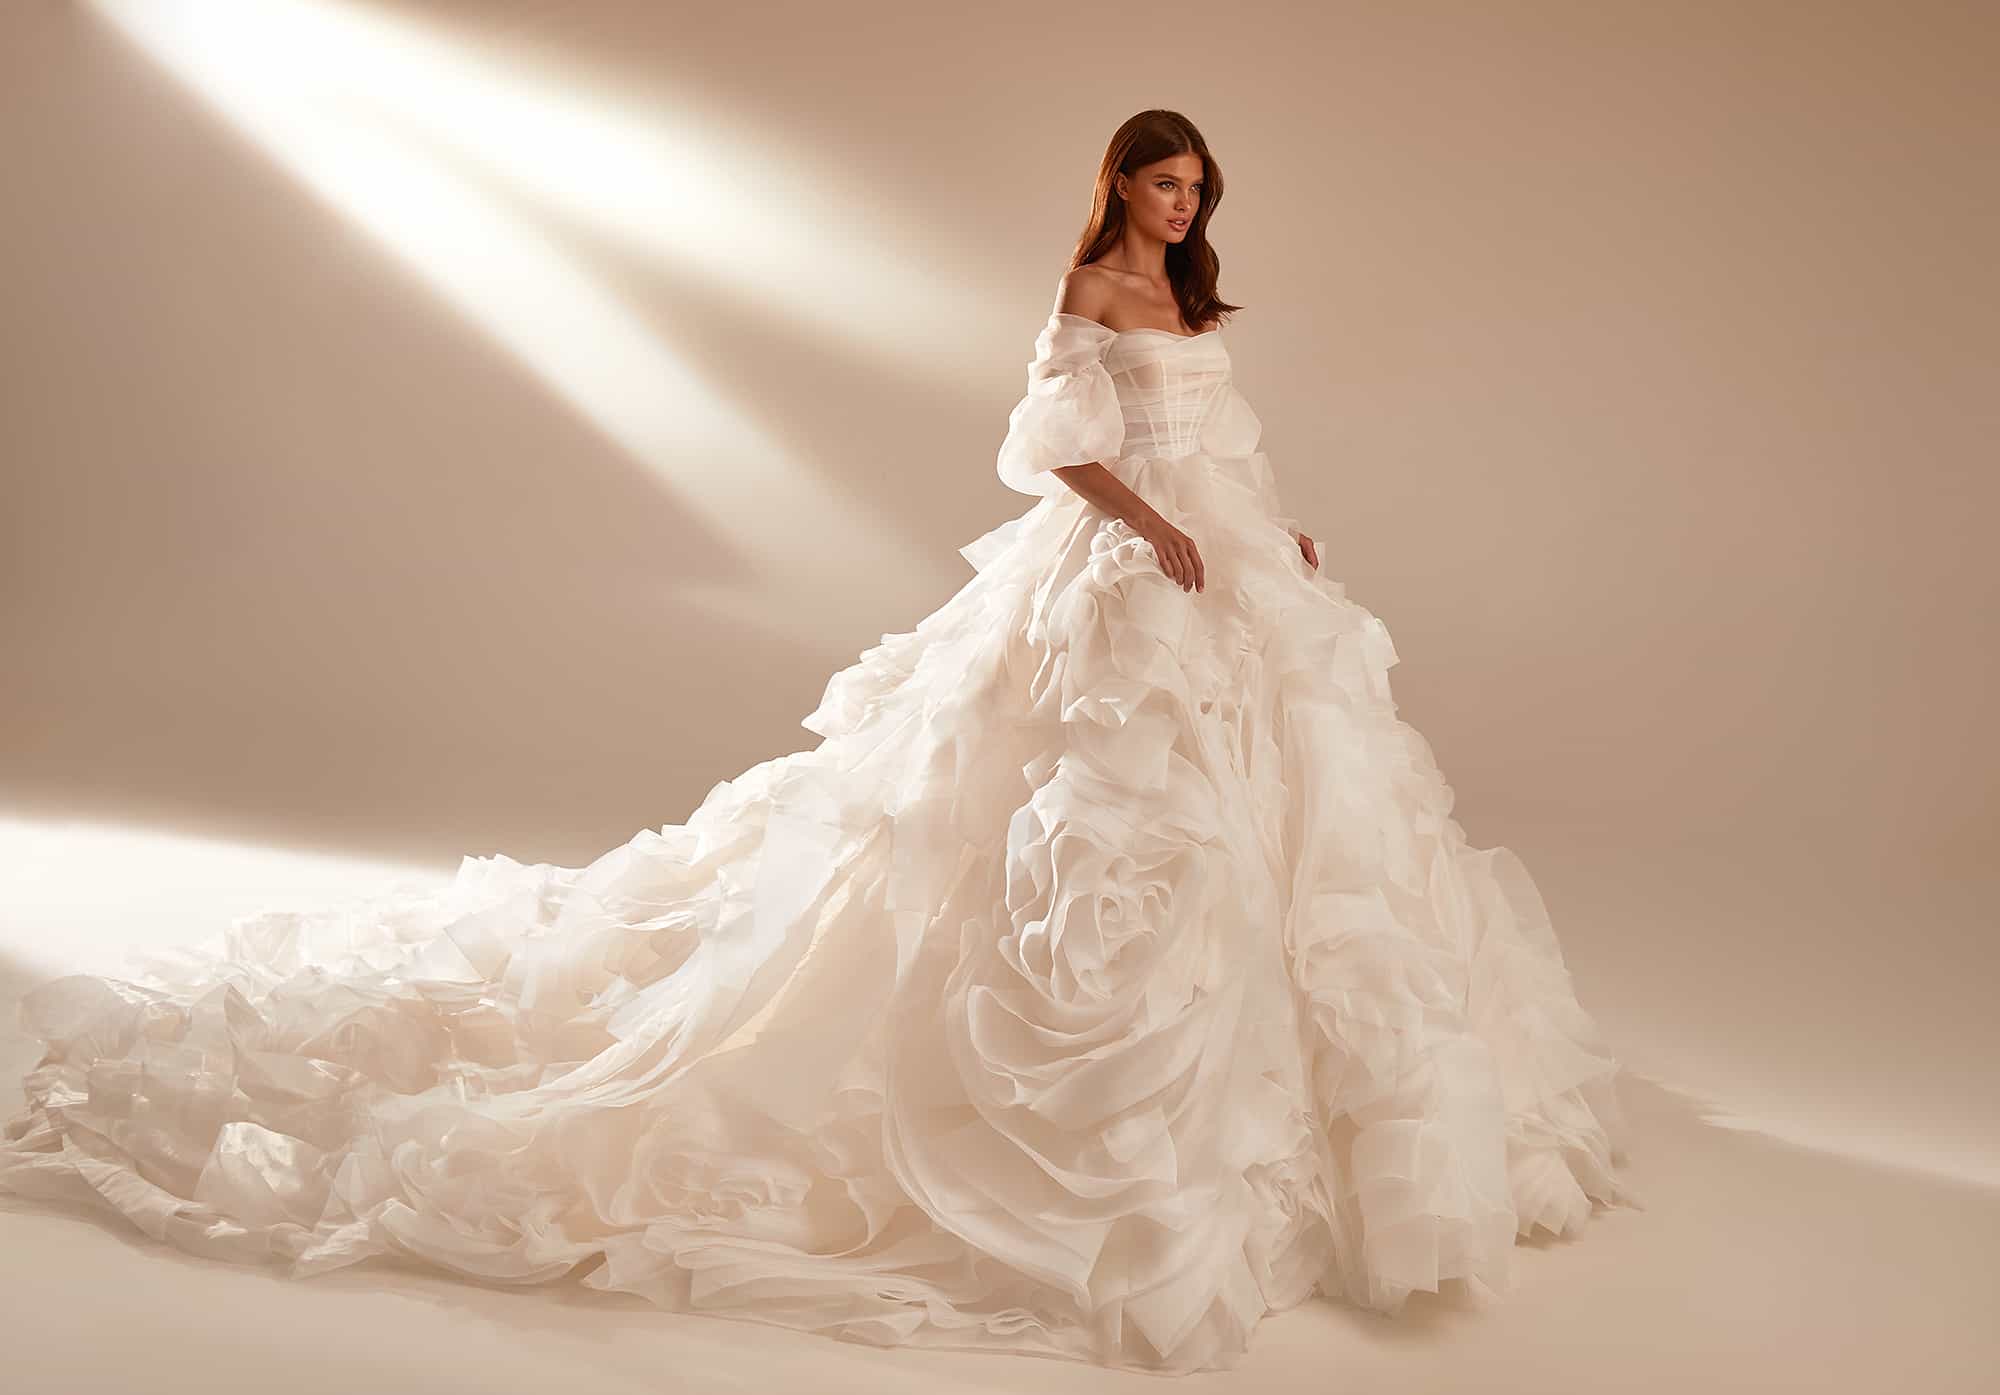 5 Reasons to Go for That Luxury Wedding Dress